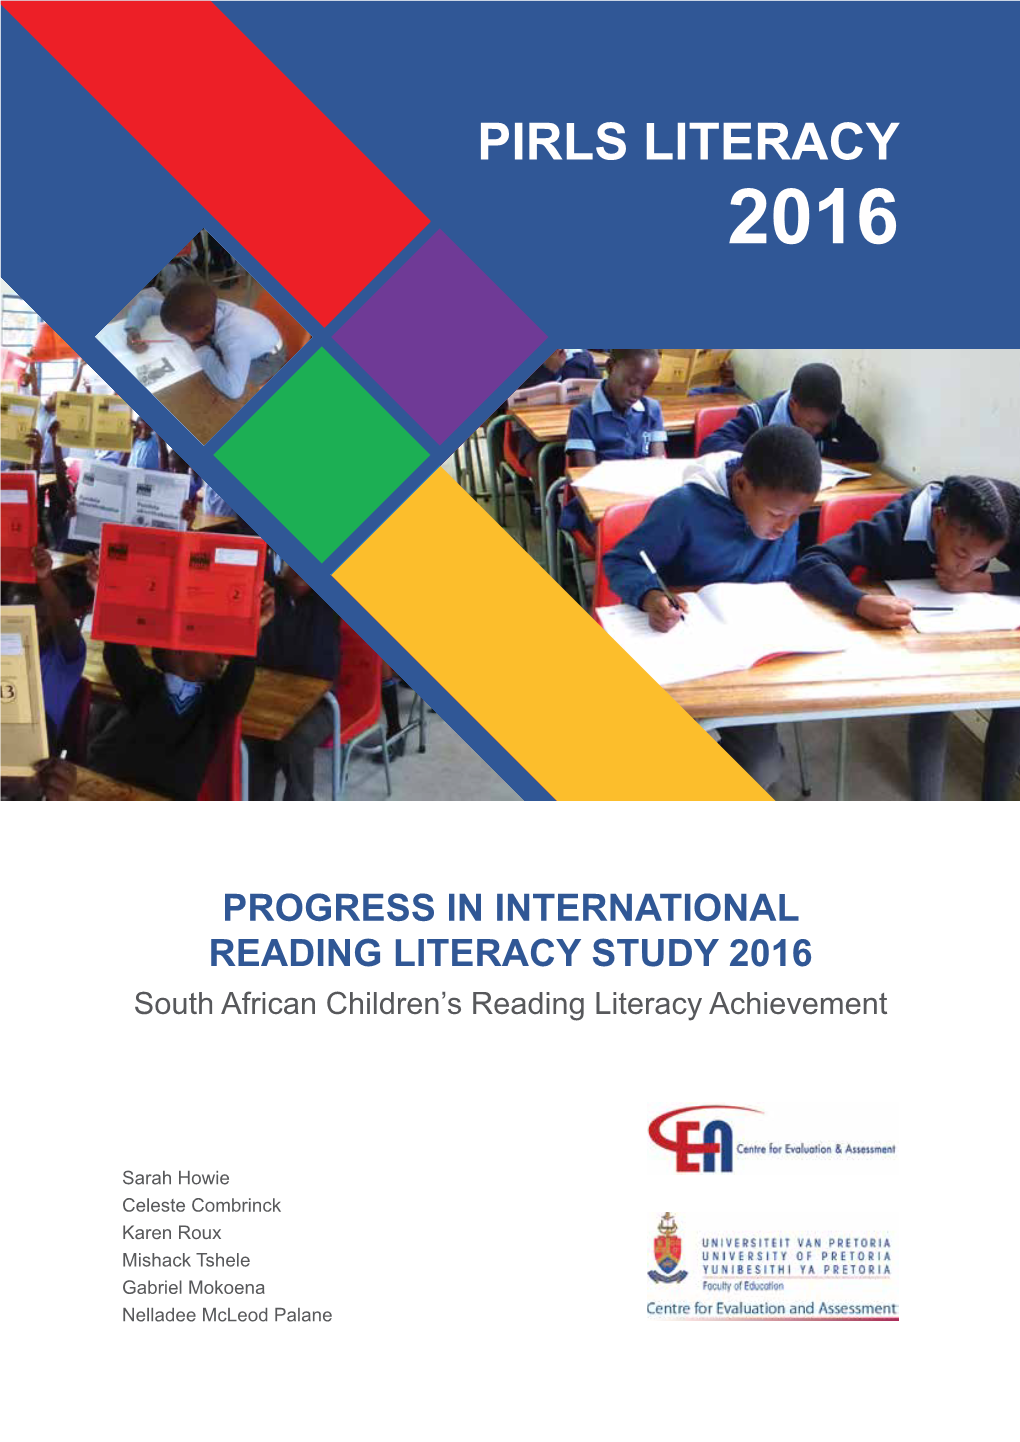 Progress in International Reading Literacy Study (PIRLS) 2016 Is the Fourth Assessment in the Current Trend Series